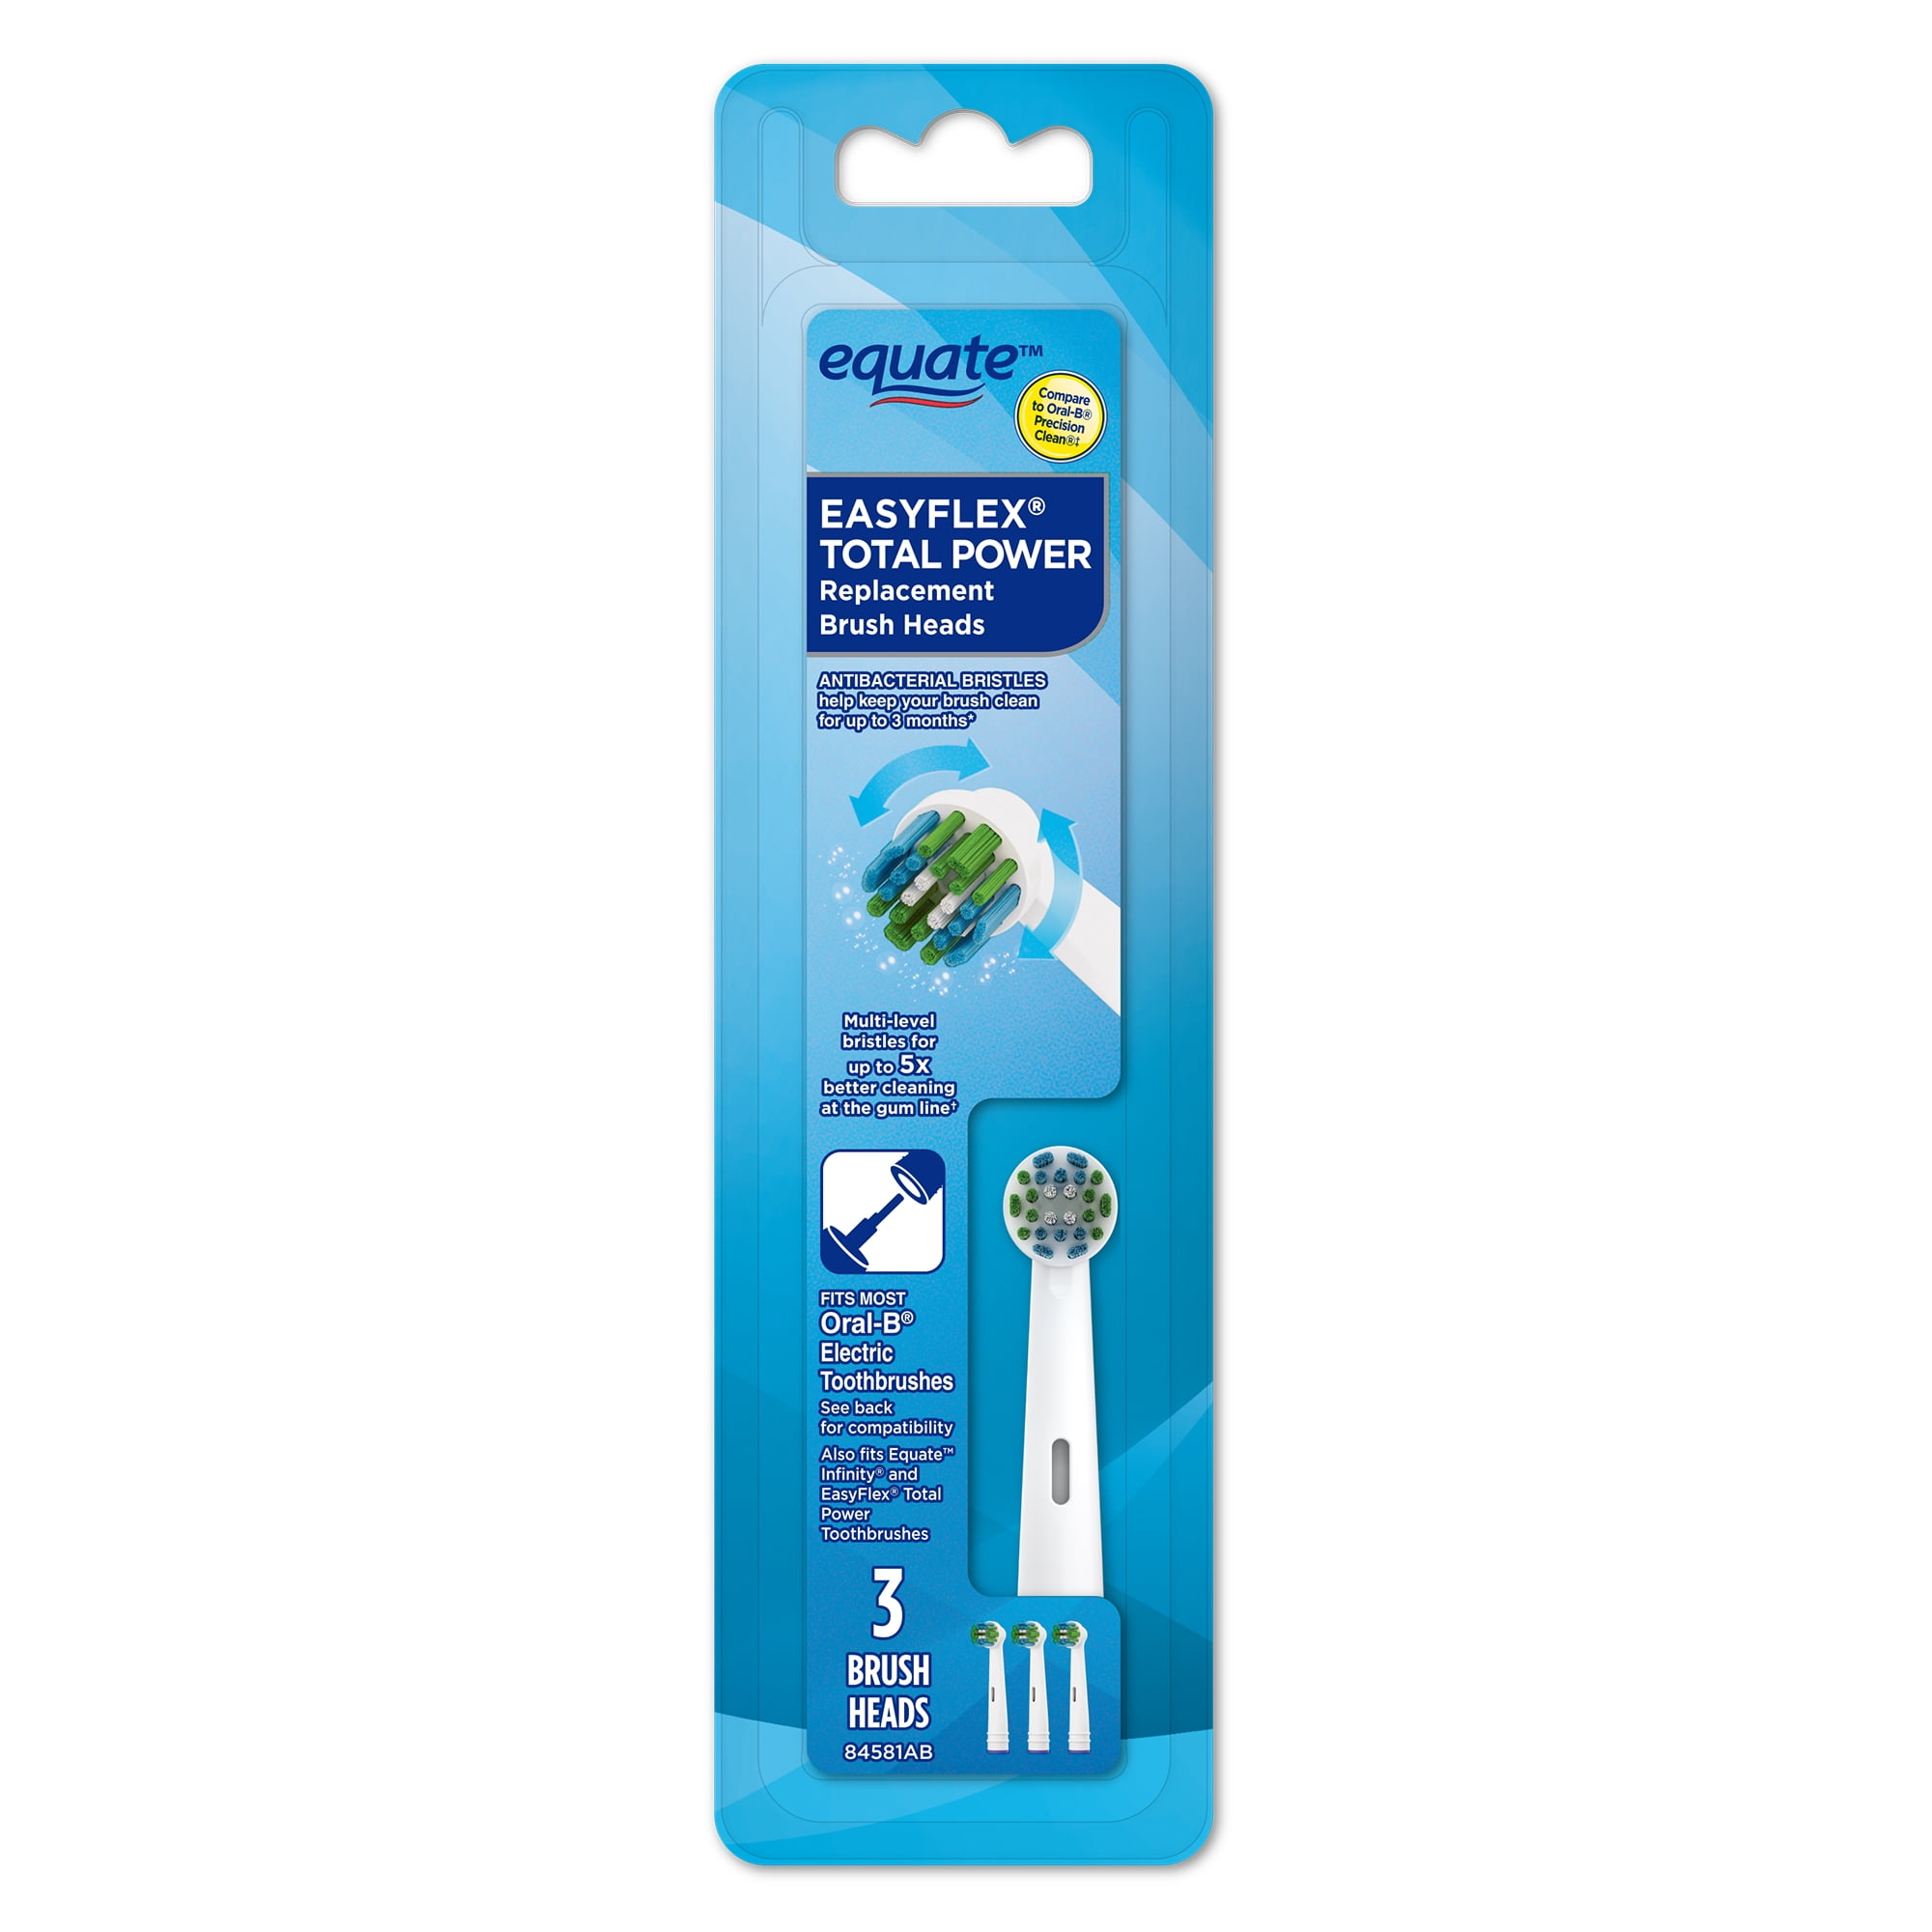 Equate EasyFlex Total Power Replacement Toothbrush Heads with Bacteria Defense Bristles, 3 count